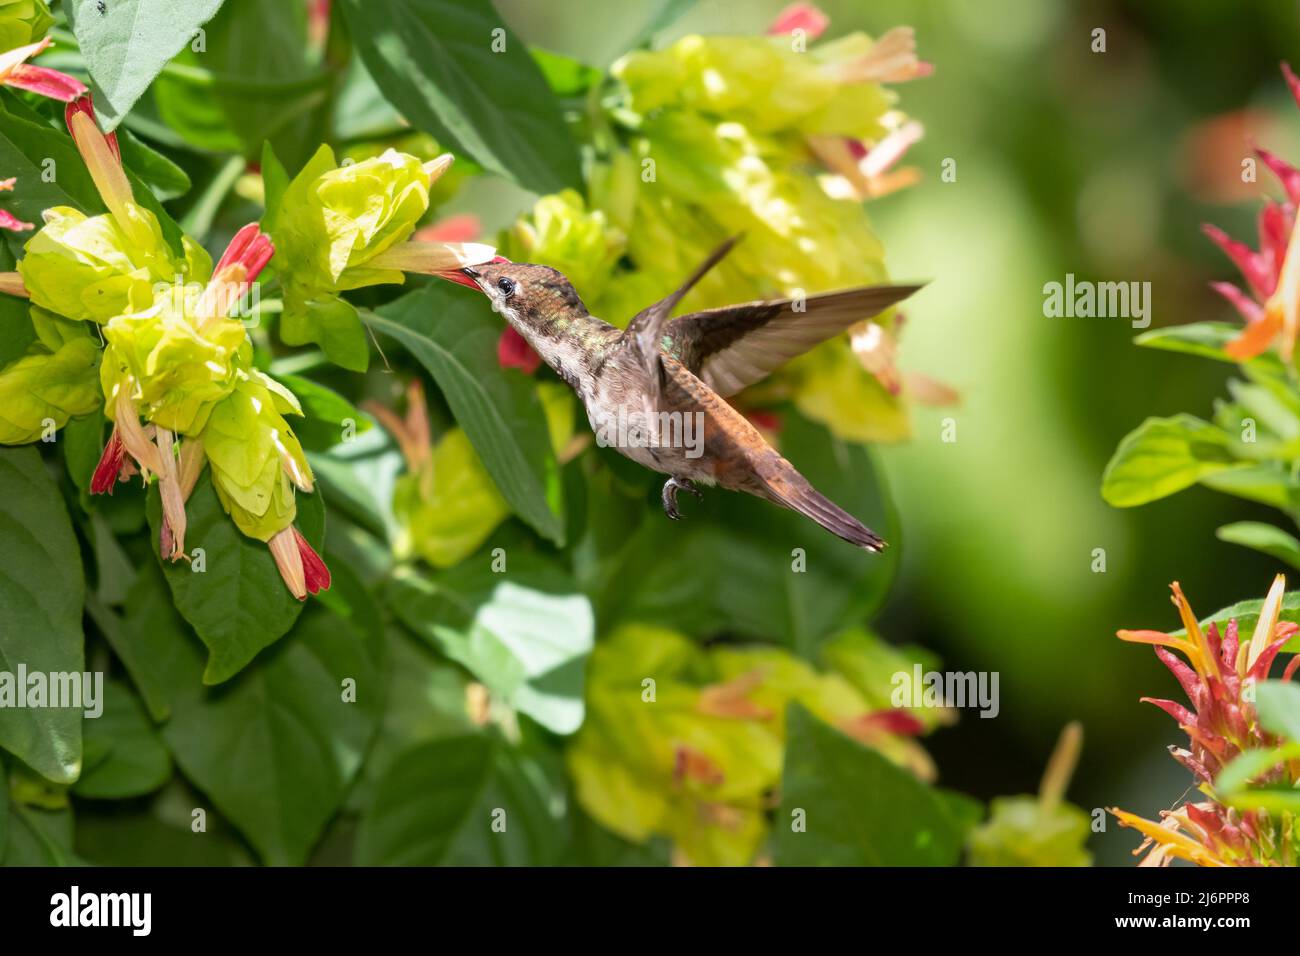 Young Ruby Topaz hummingbird, Chrysolampis mosquitus, flying in a garden surrounded by tropical Shrimp plant flowers green and pink. Stock Photo